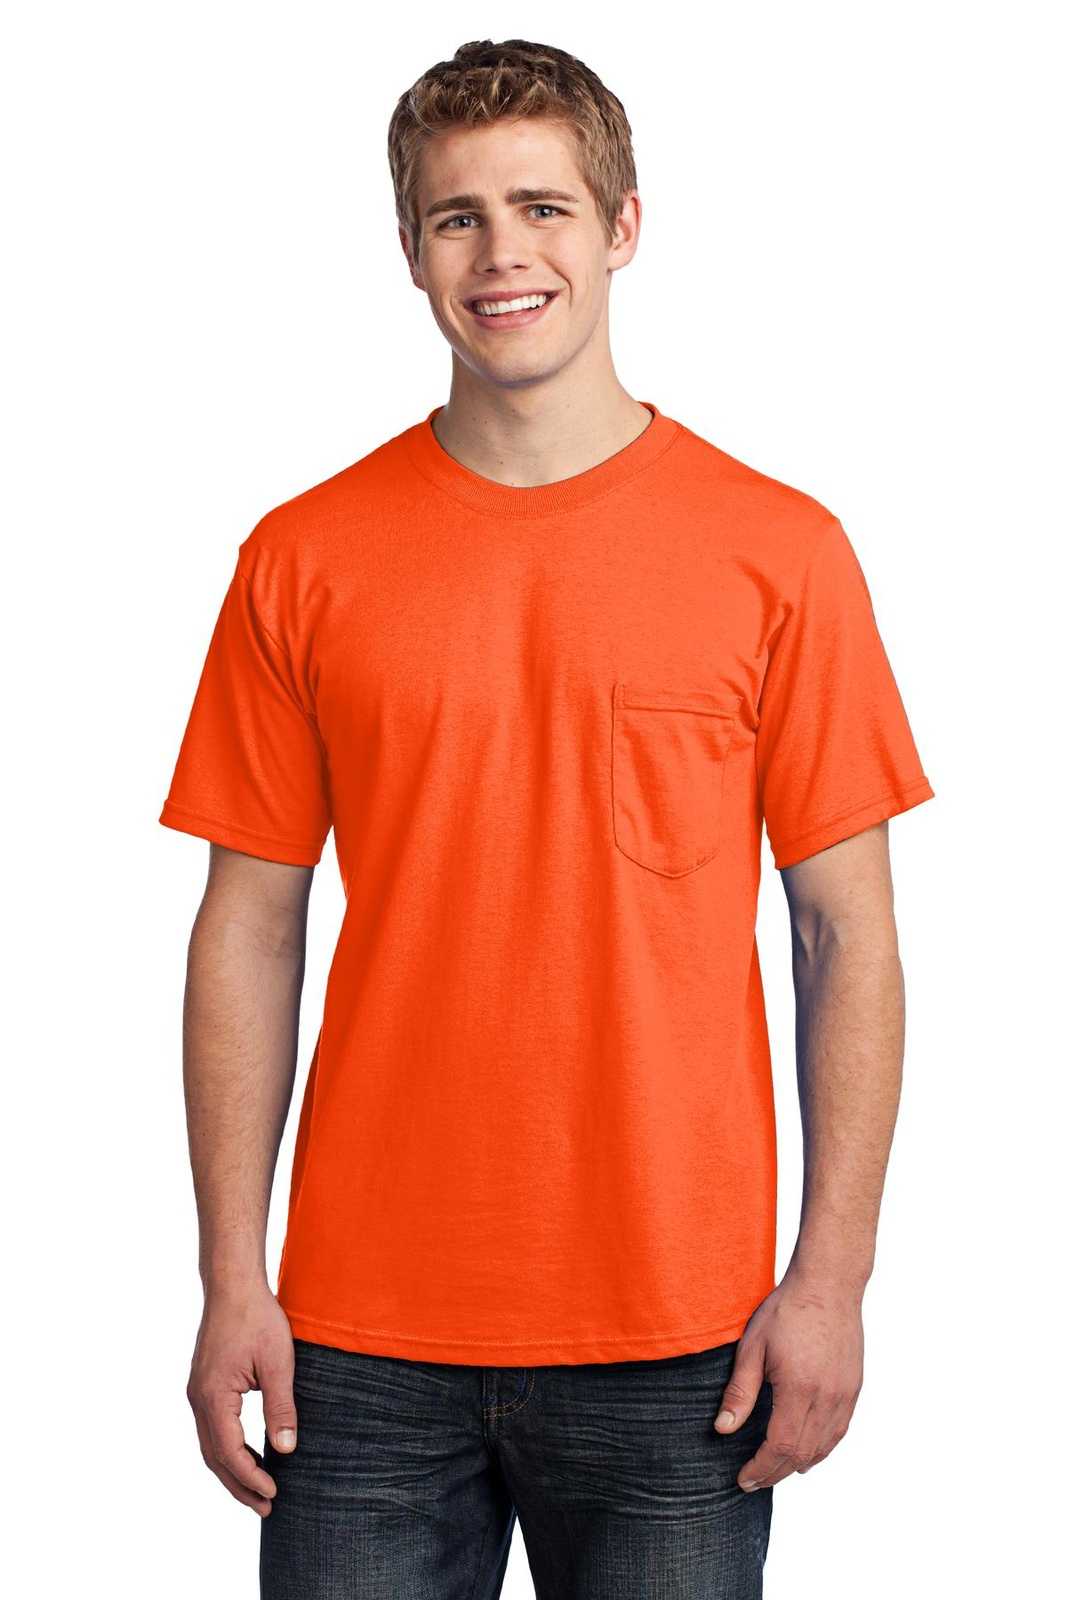 Port & Company USA100P All-American Pocket Tee - Safety Orange - HIT a Double - 1